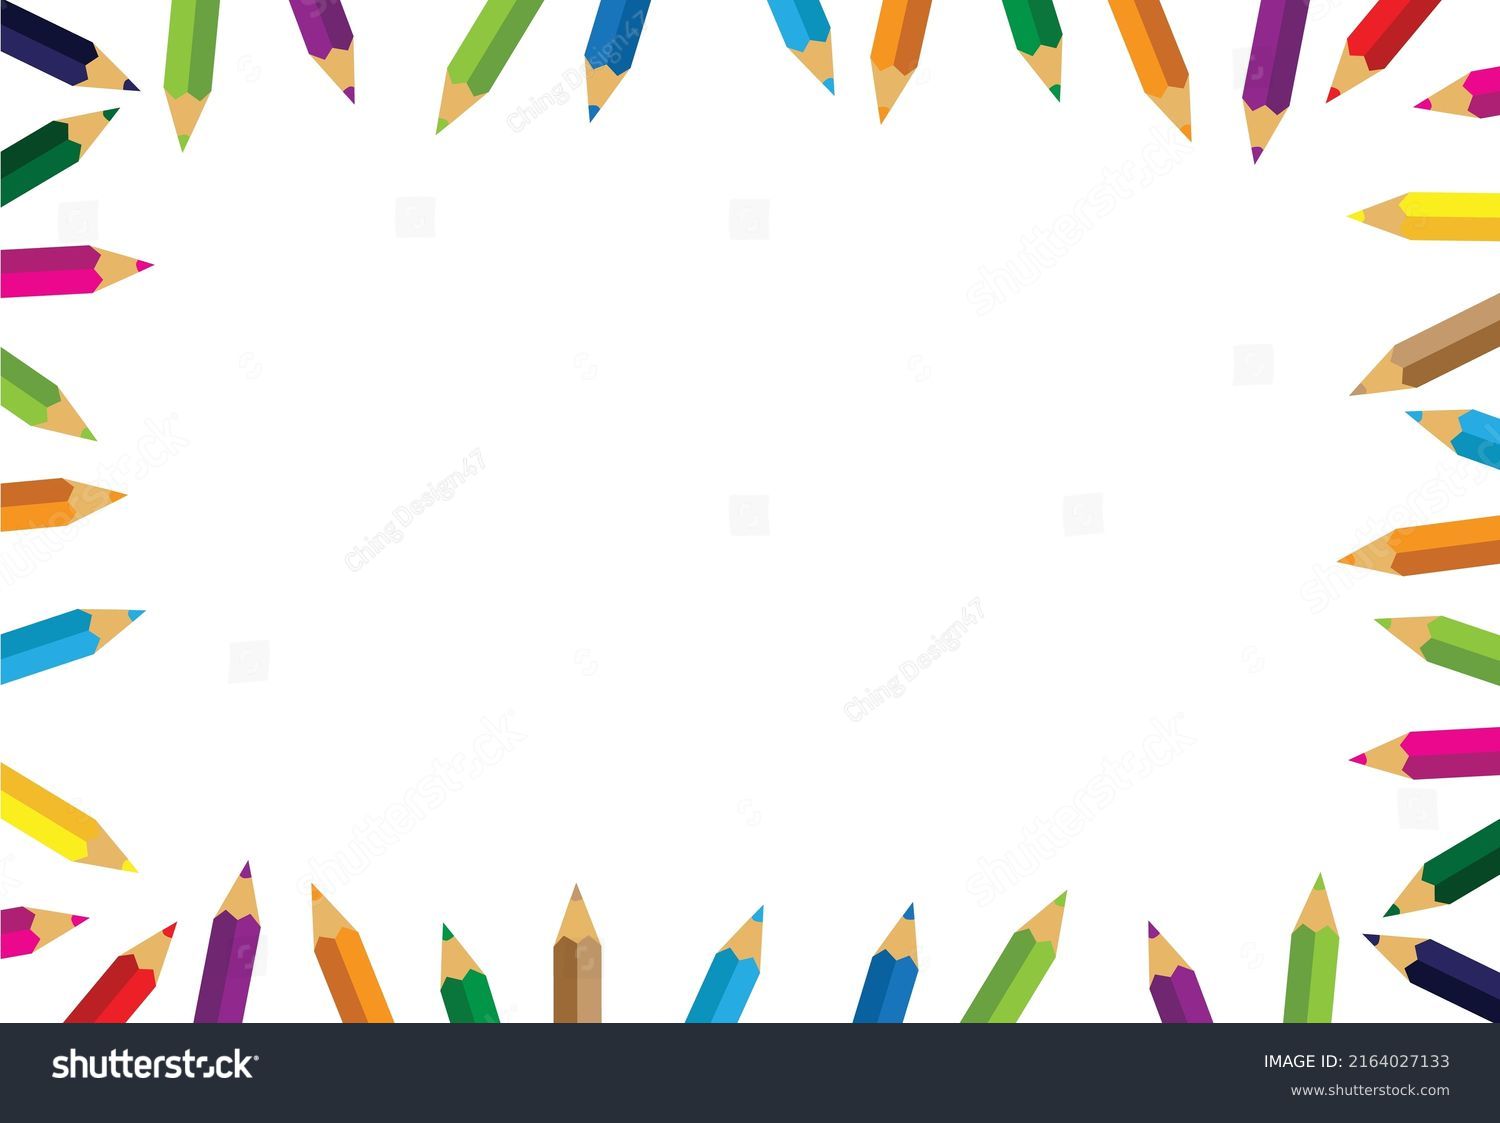 Colorful Pencils Frame Border On White Stock Vector (Royalty Free ...